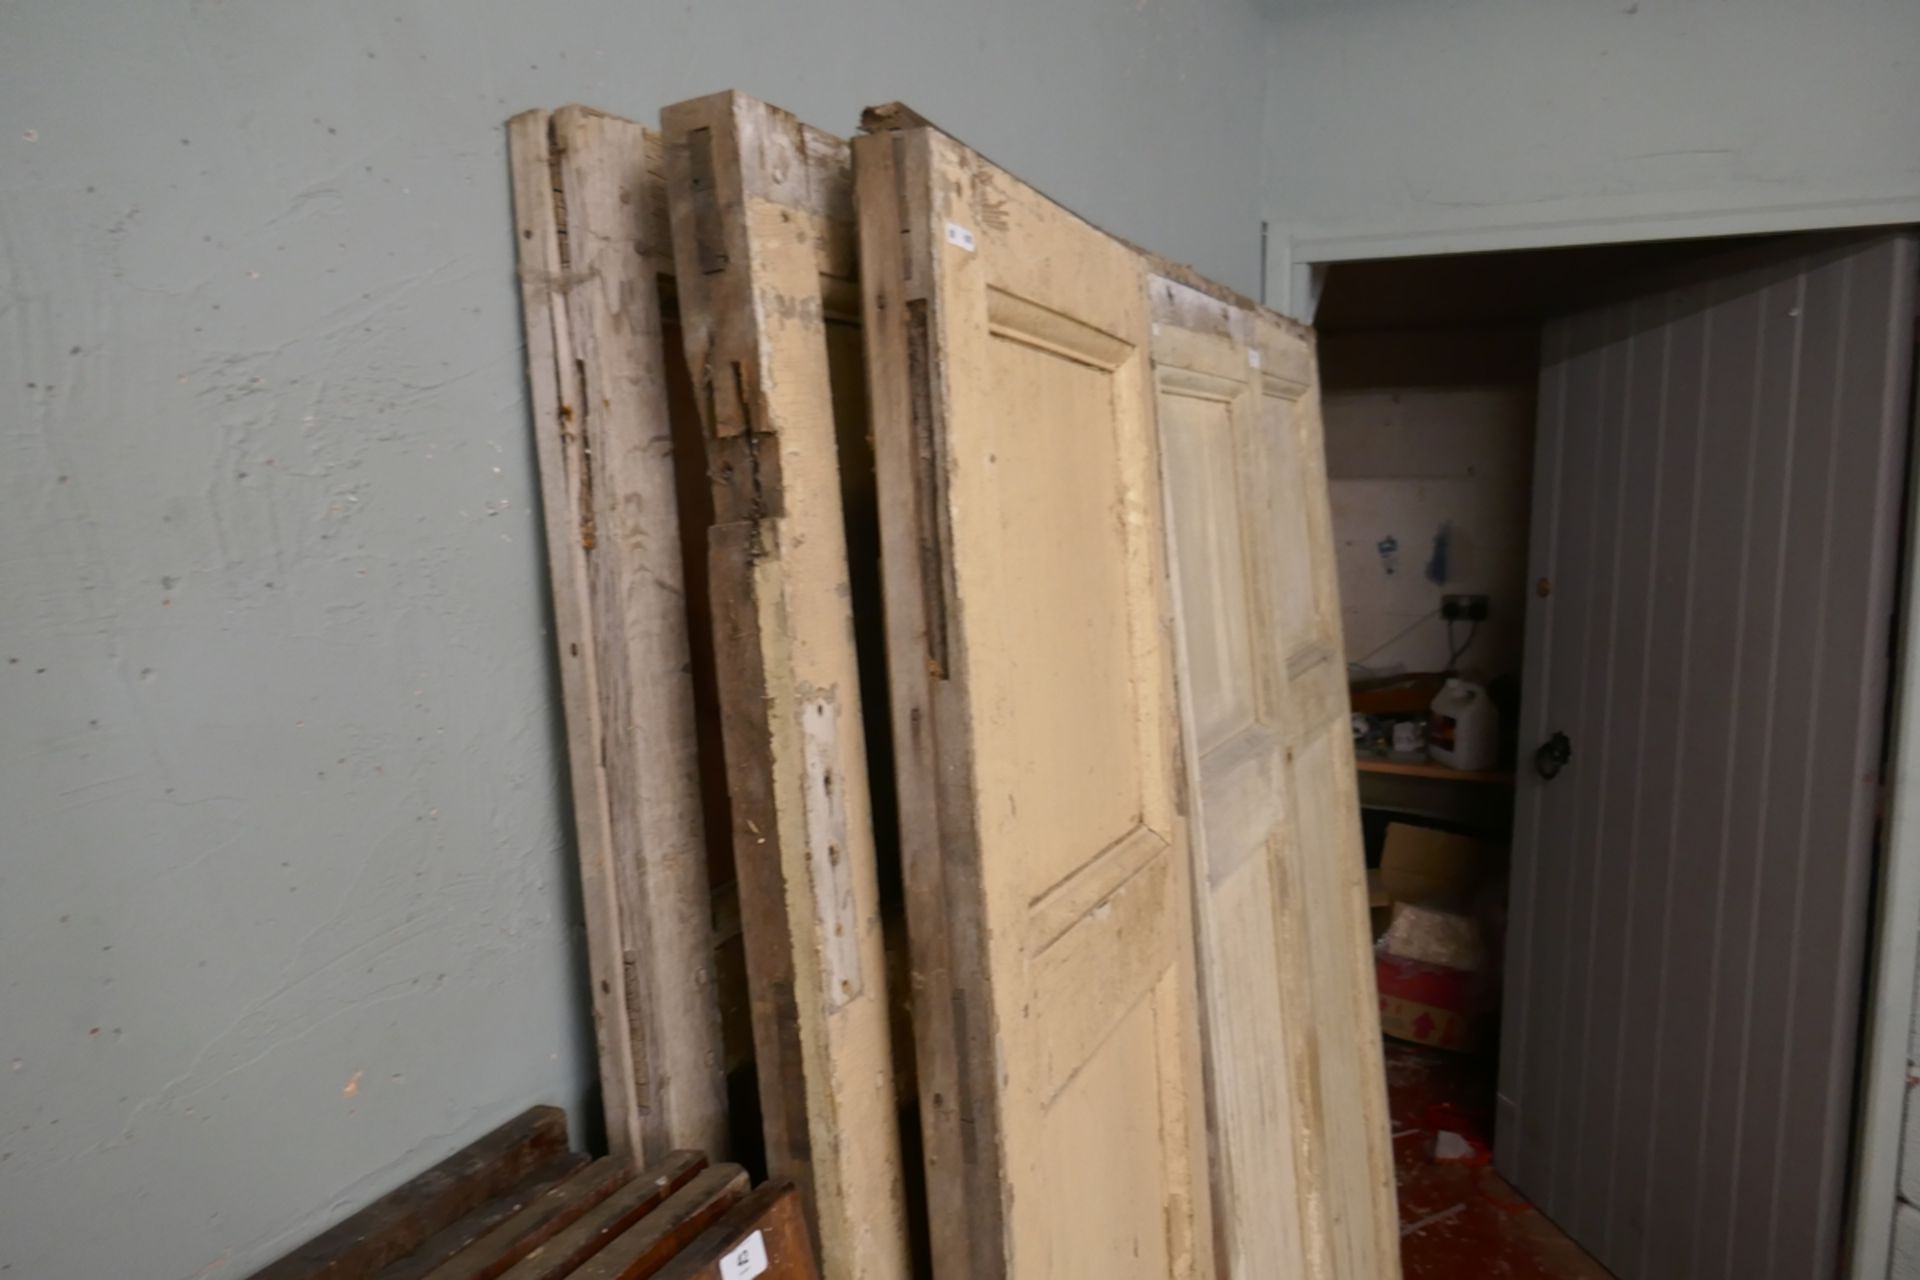 8 large pieces of wood panelling - approx 185cm x 55cm each - Image 3 of 3